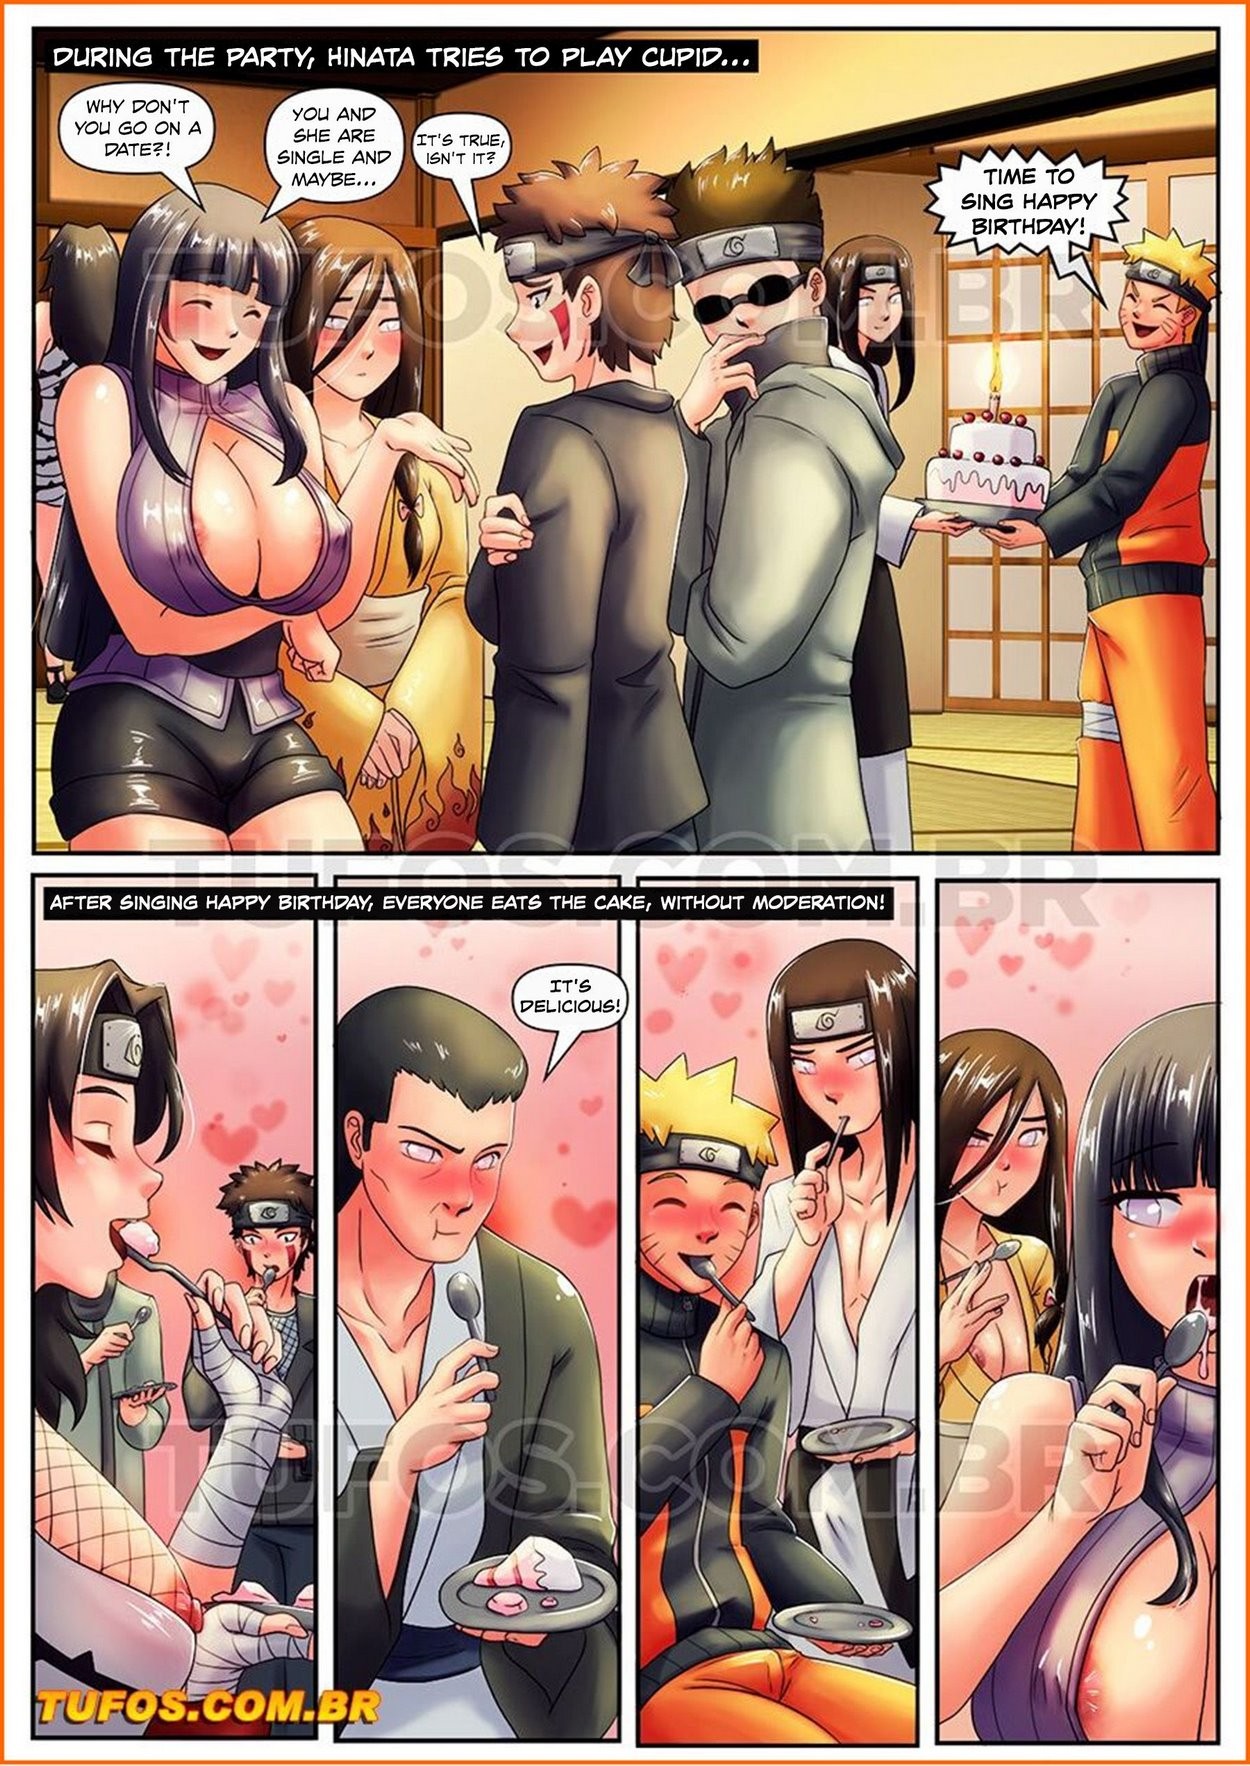 Narutoon 8 - The Cake of Temptation porn comic picture 3